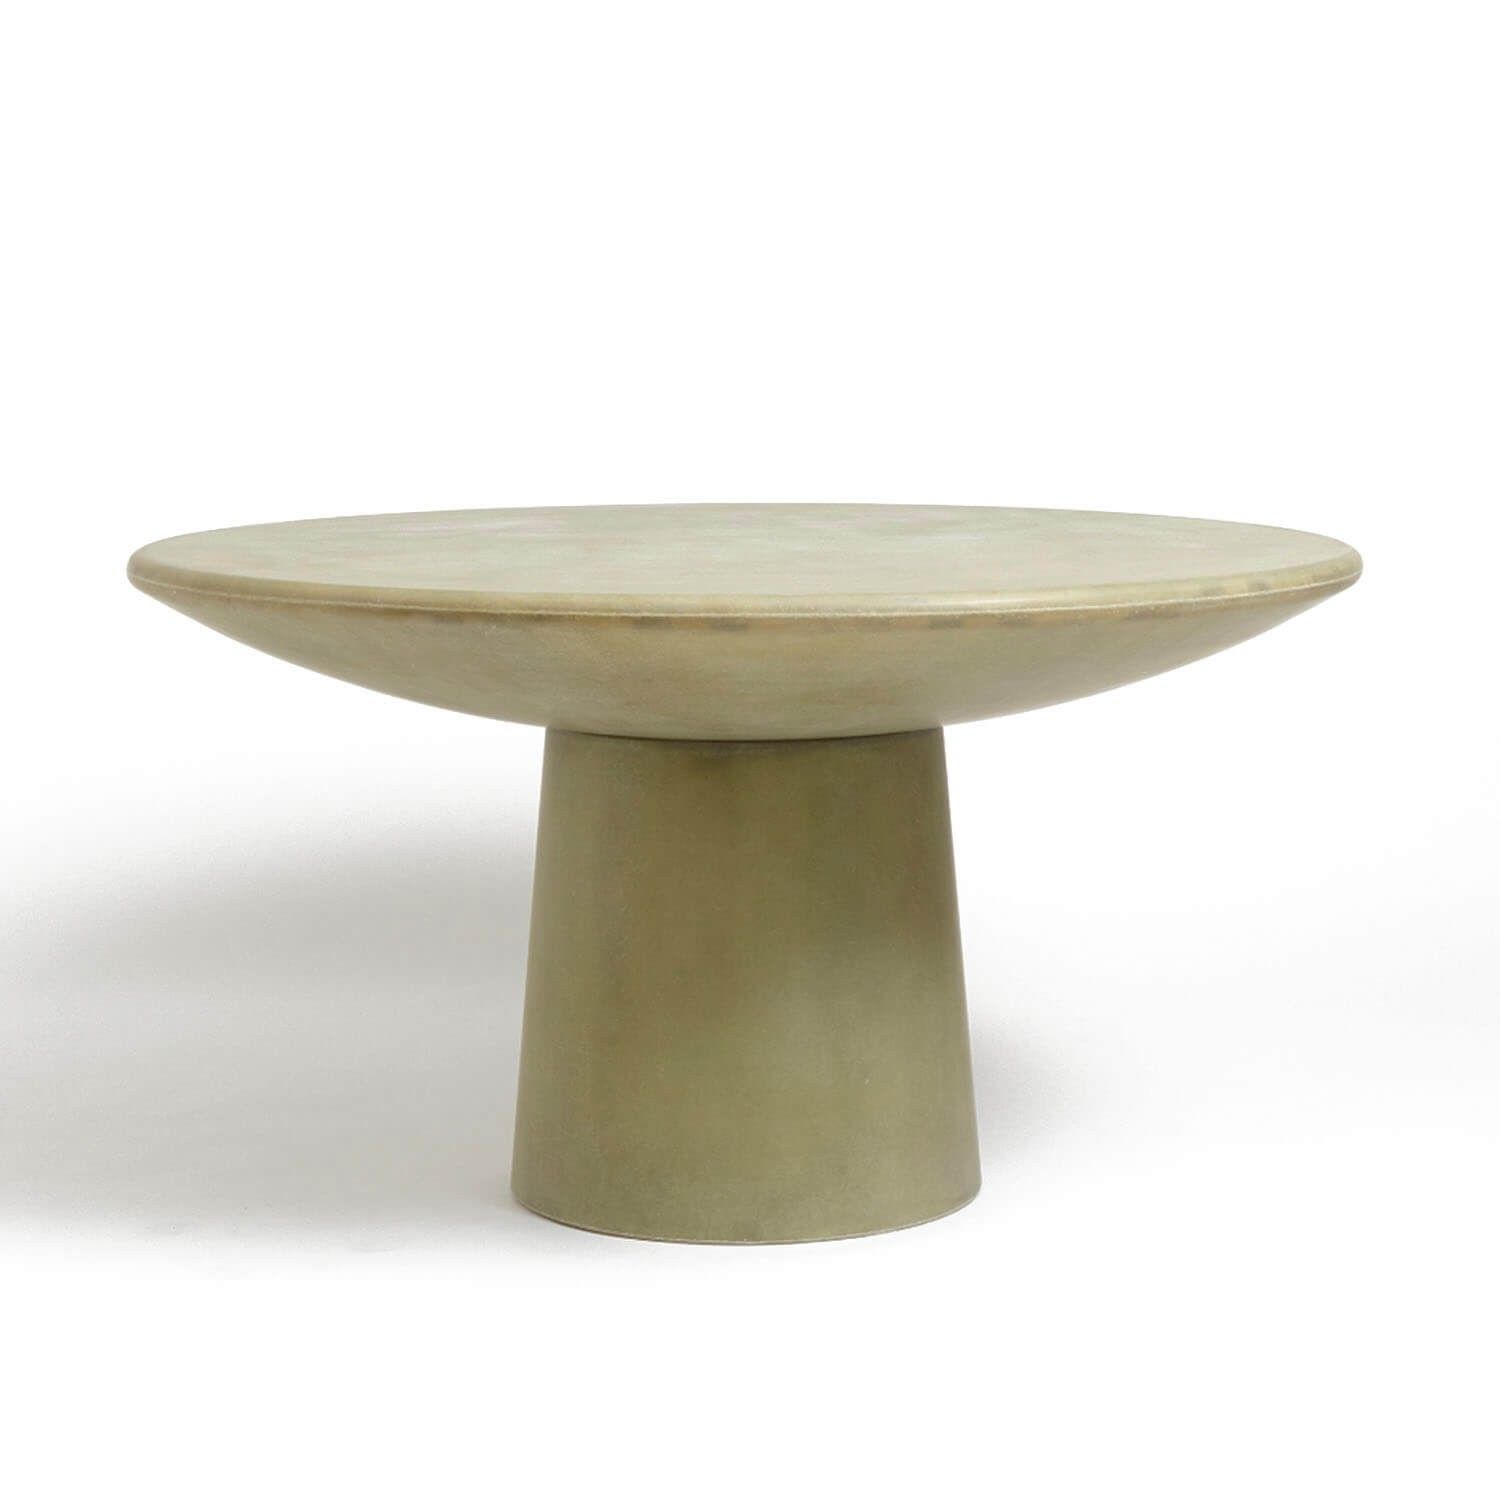 Roly Poly Dining Table | Kooku With Regard To Recent Faye Dining Tables (View 6 of 25)